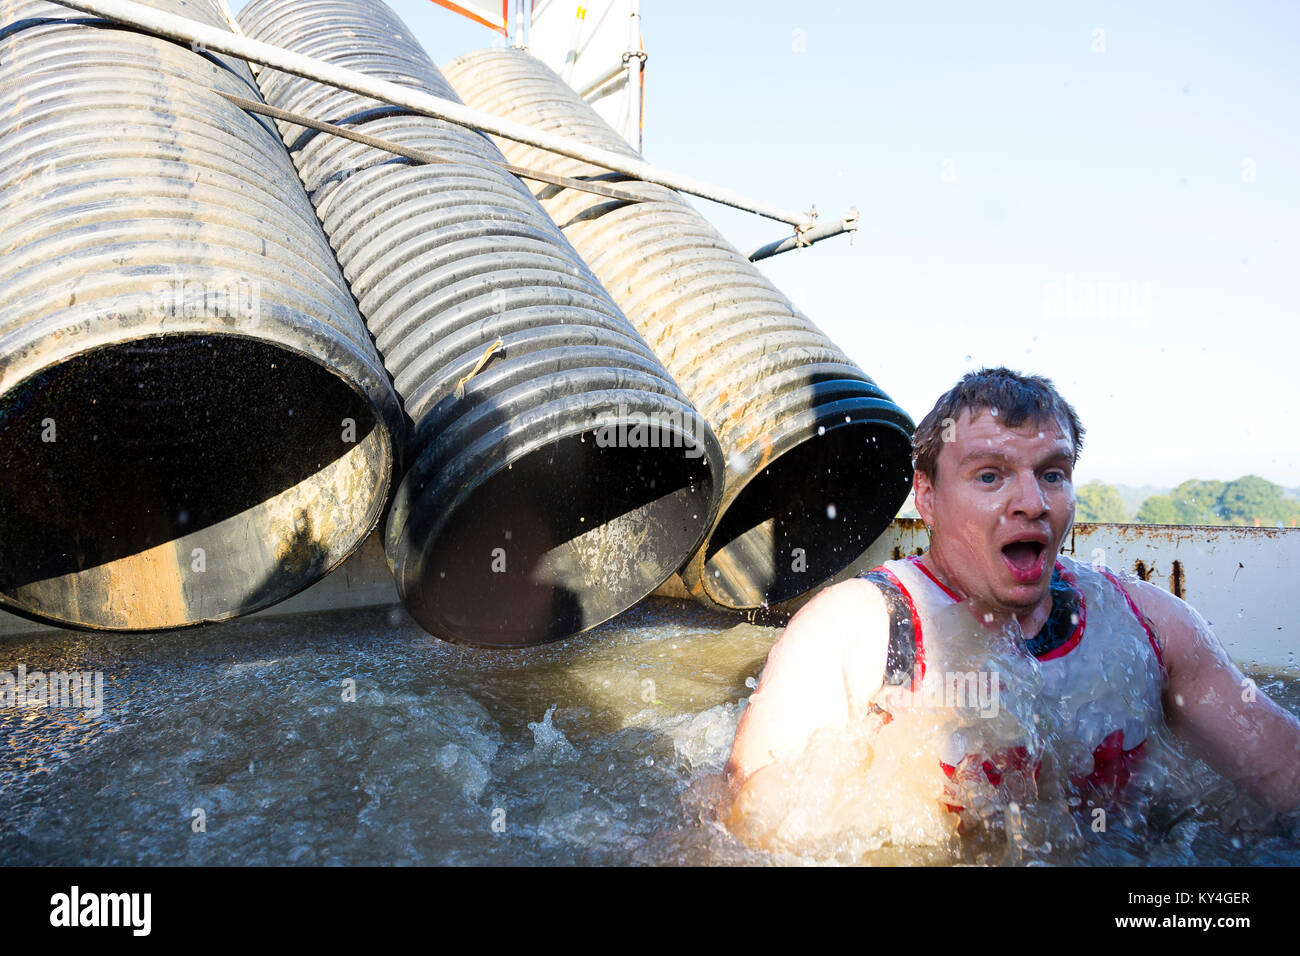 Sussex, UK. A young man pulls a shocked face as he emerges from a pool of freezing water during a Tough Mudder obstacle course. Stock Photo